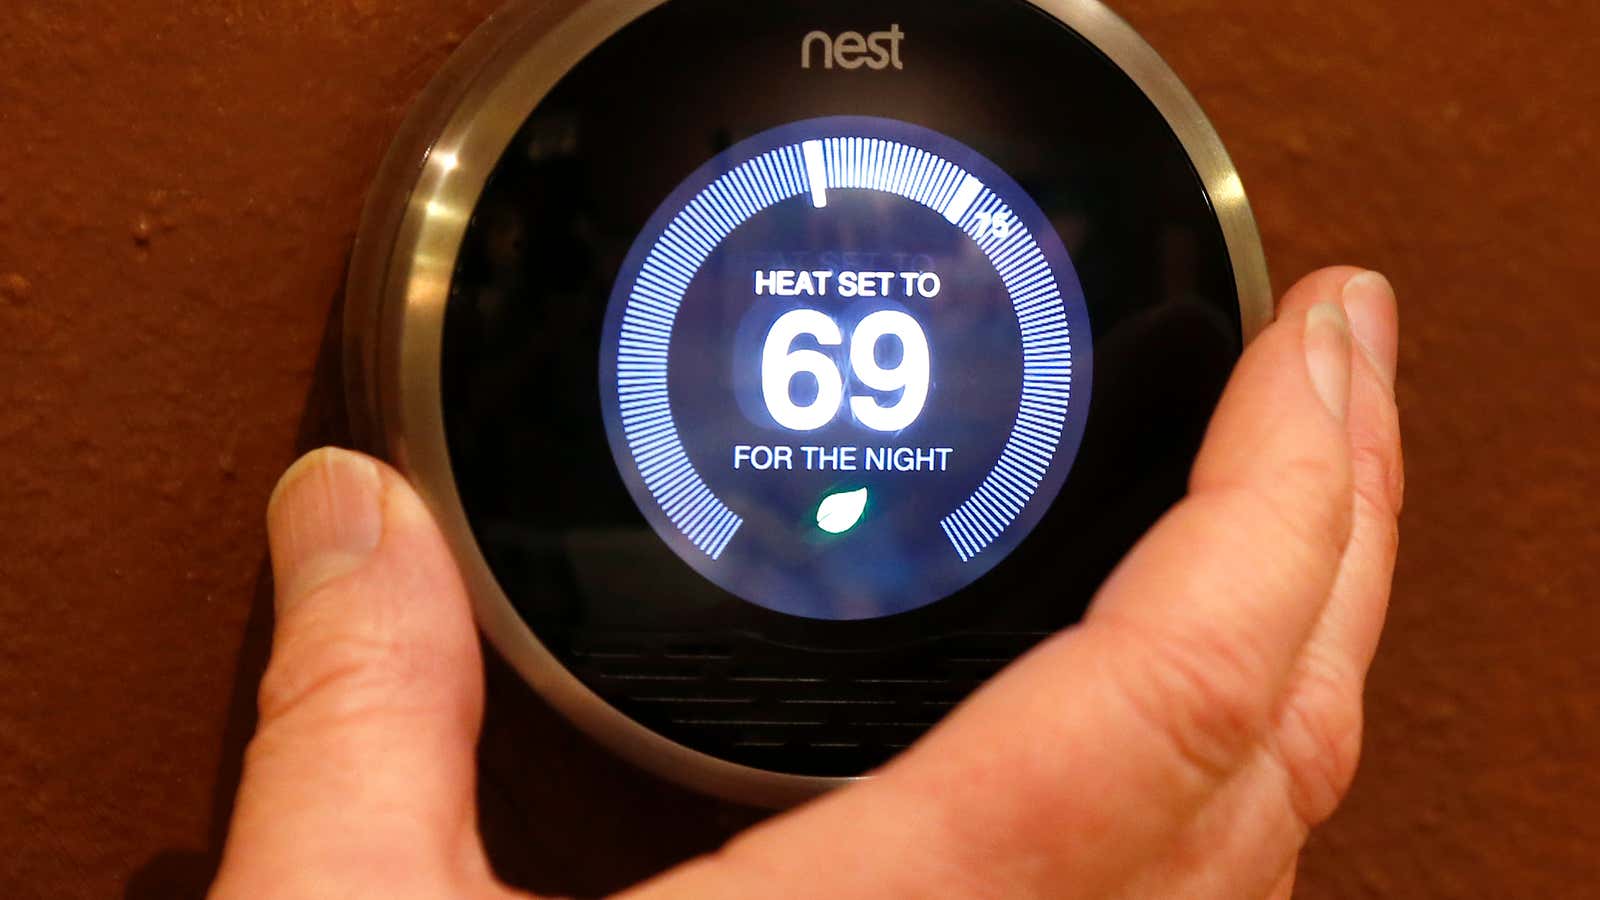 A Nest thermostat found in many so-called smart homes